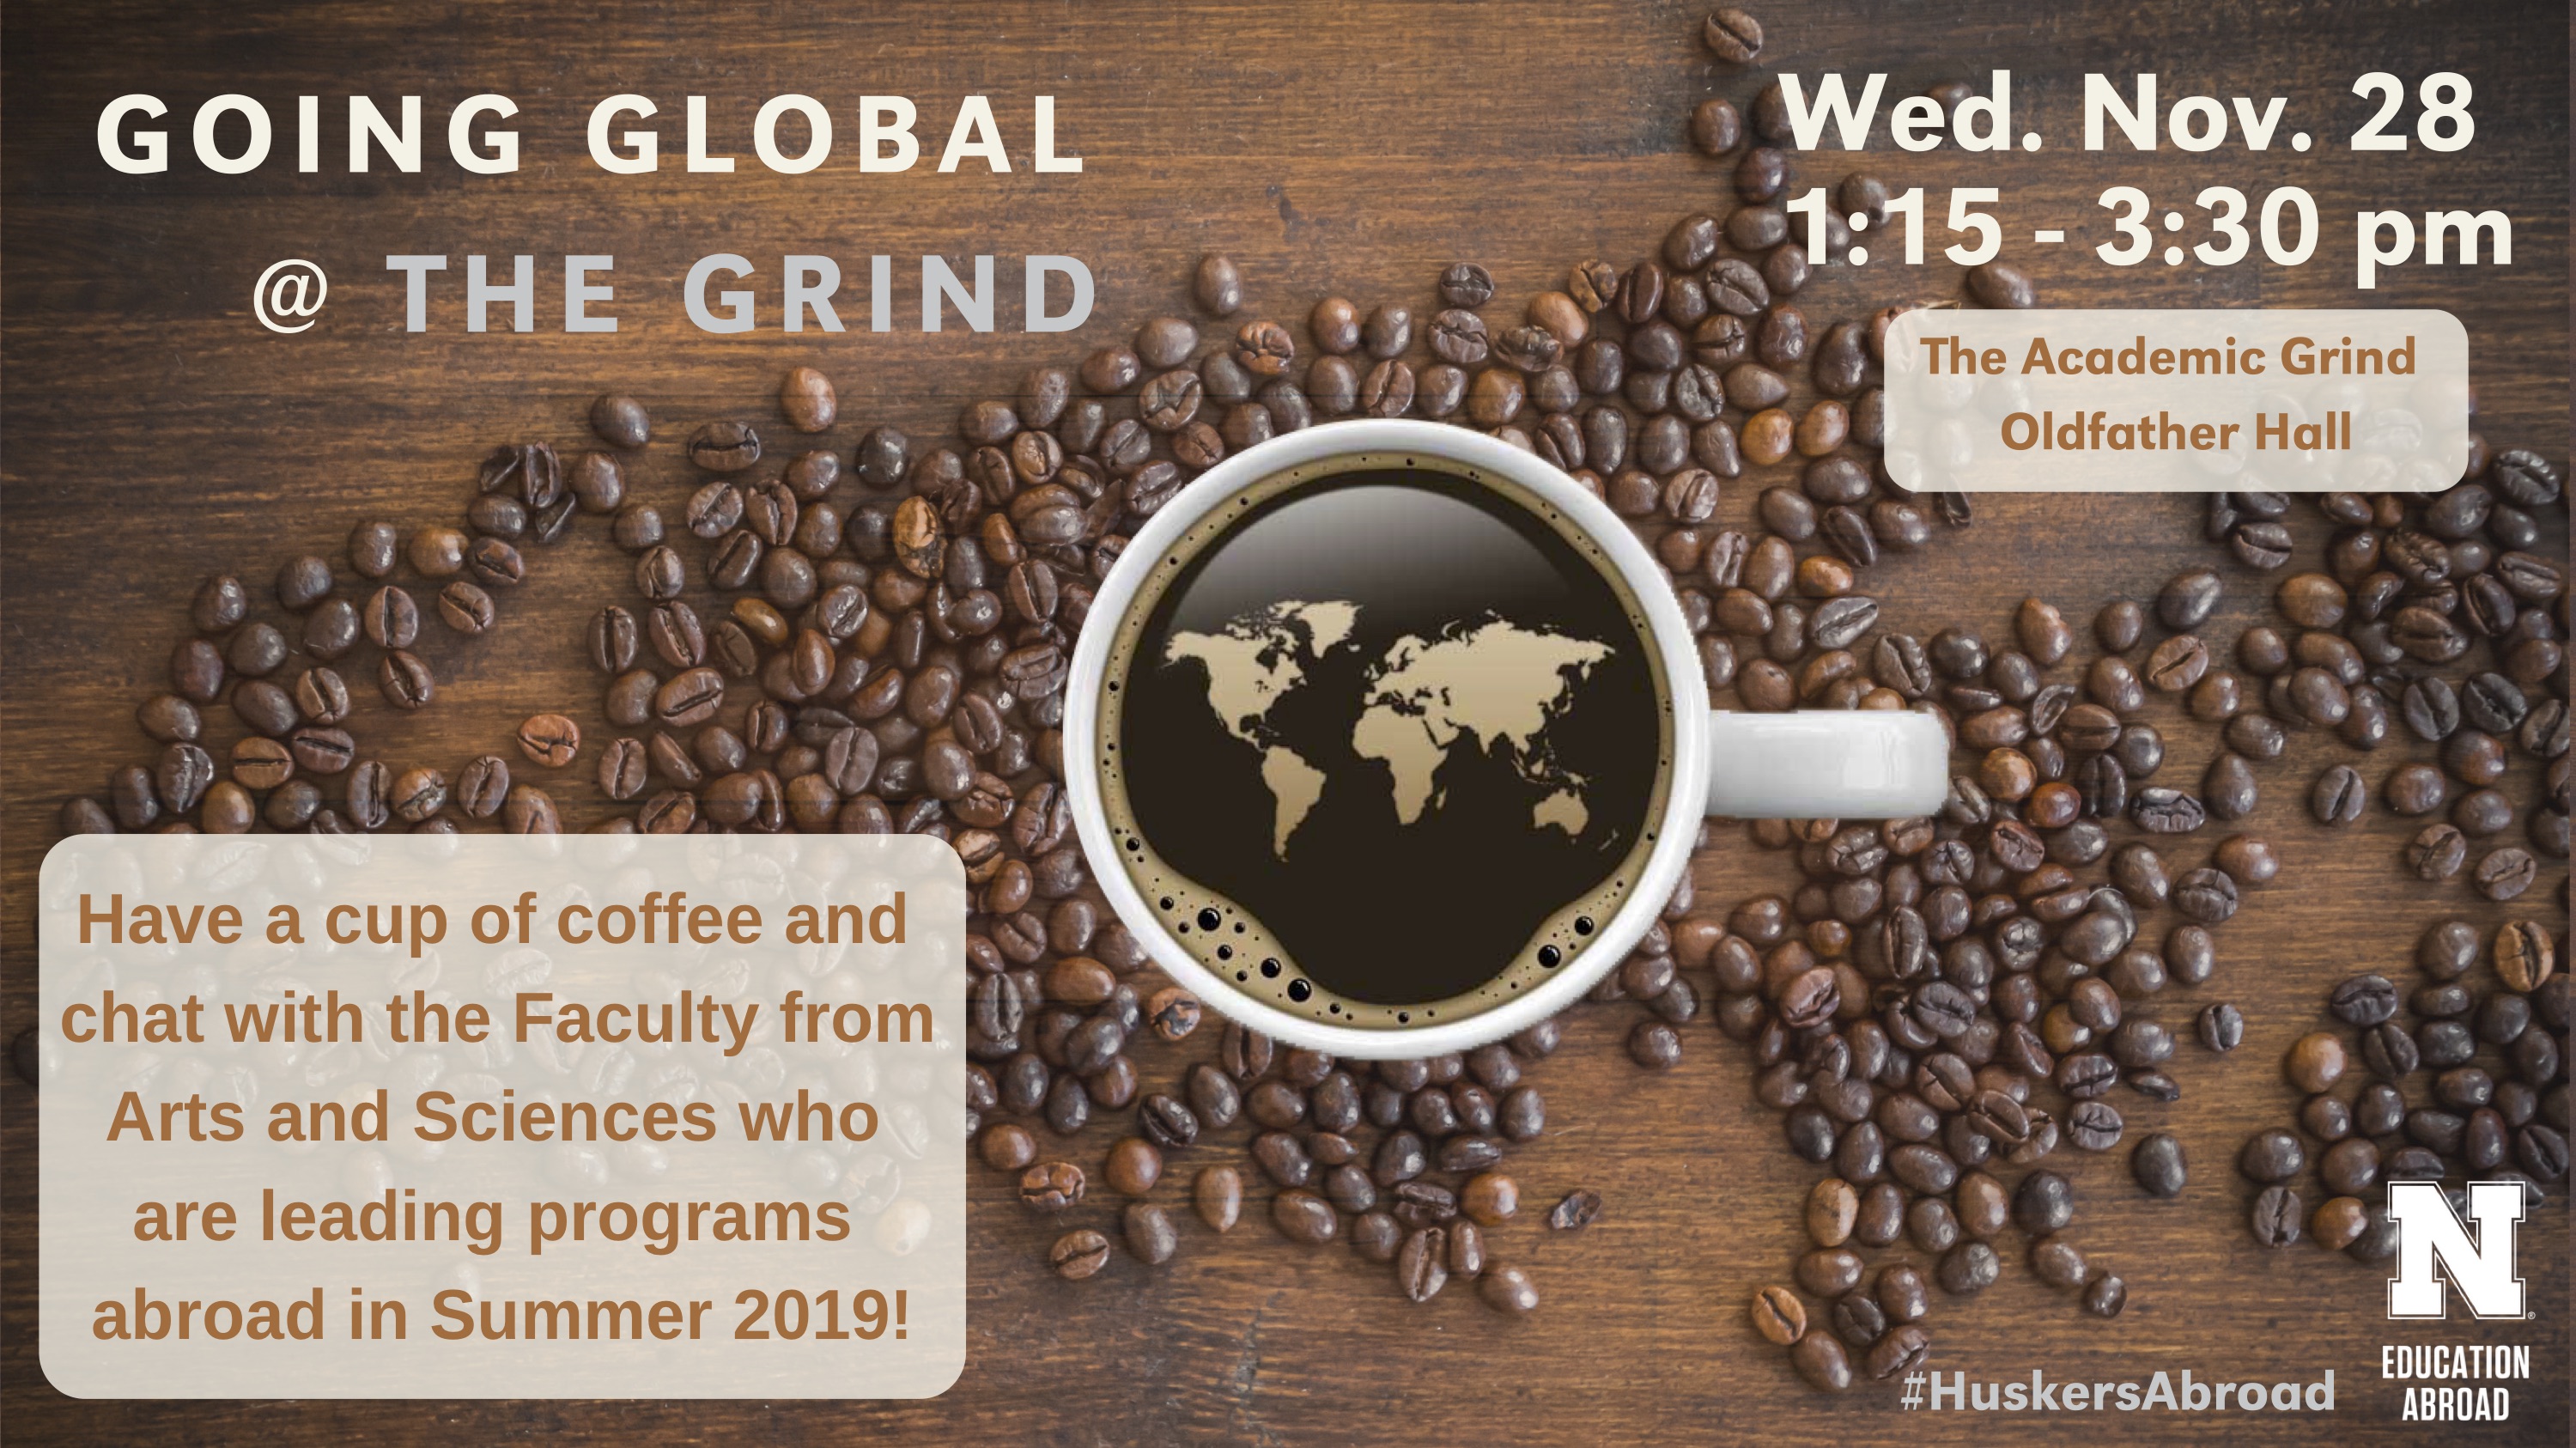 Going Global at the Grind